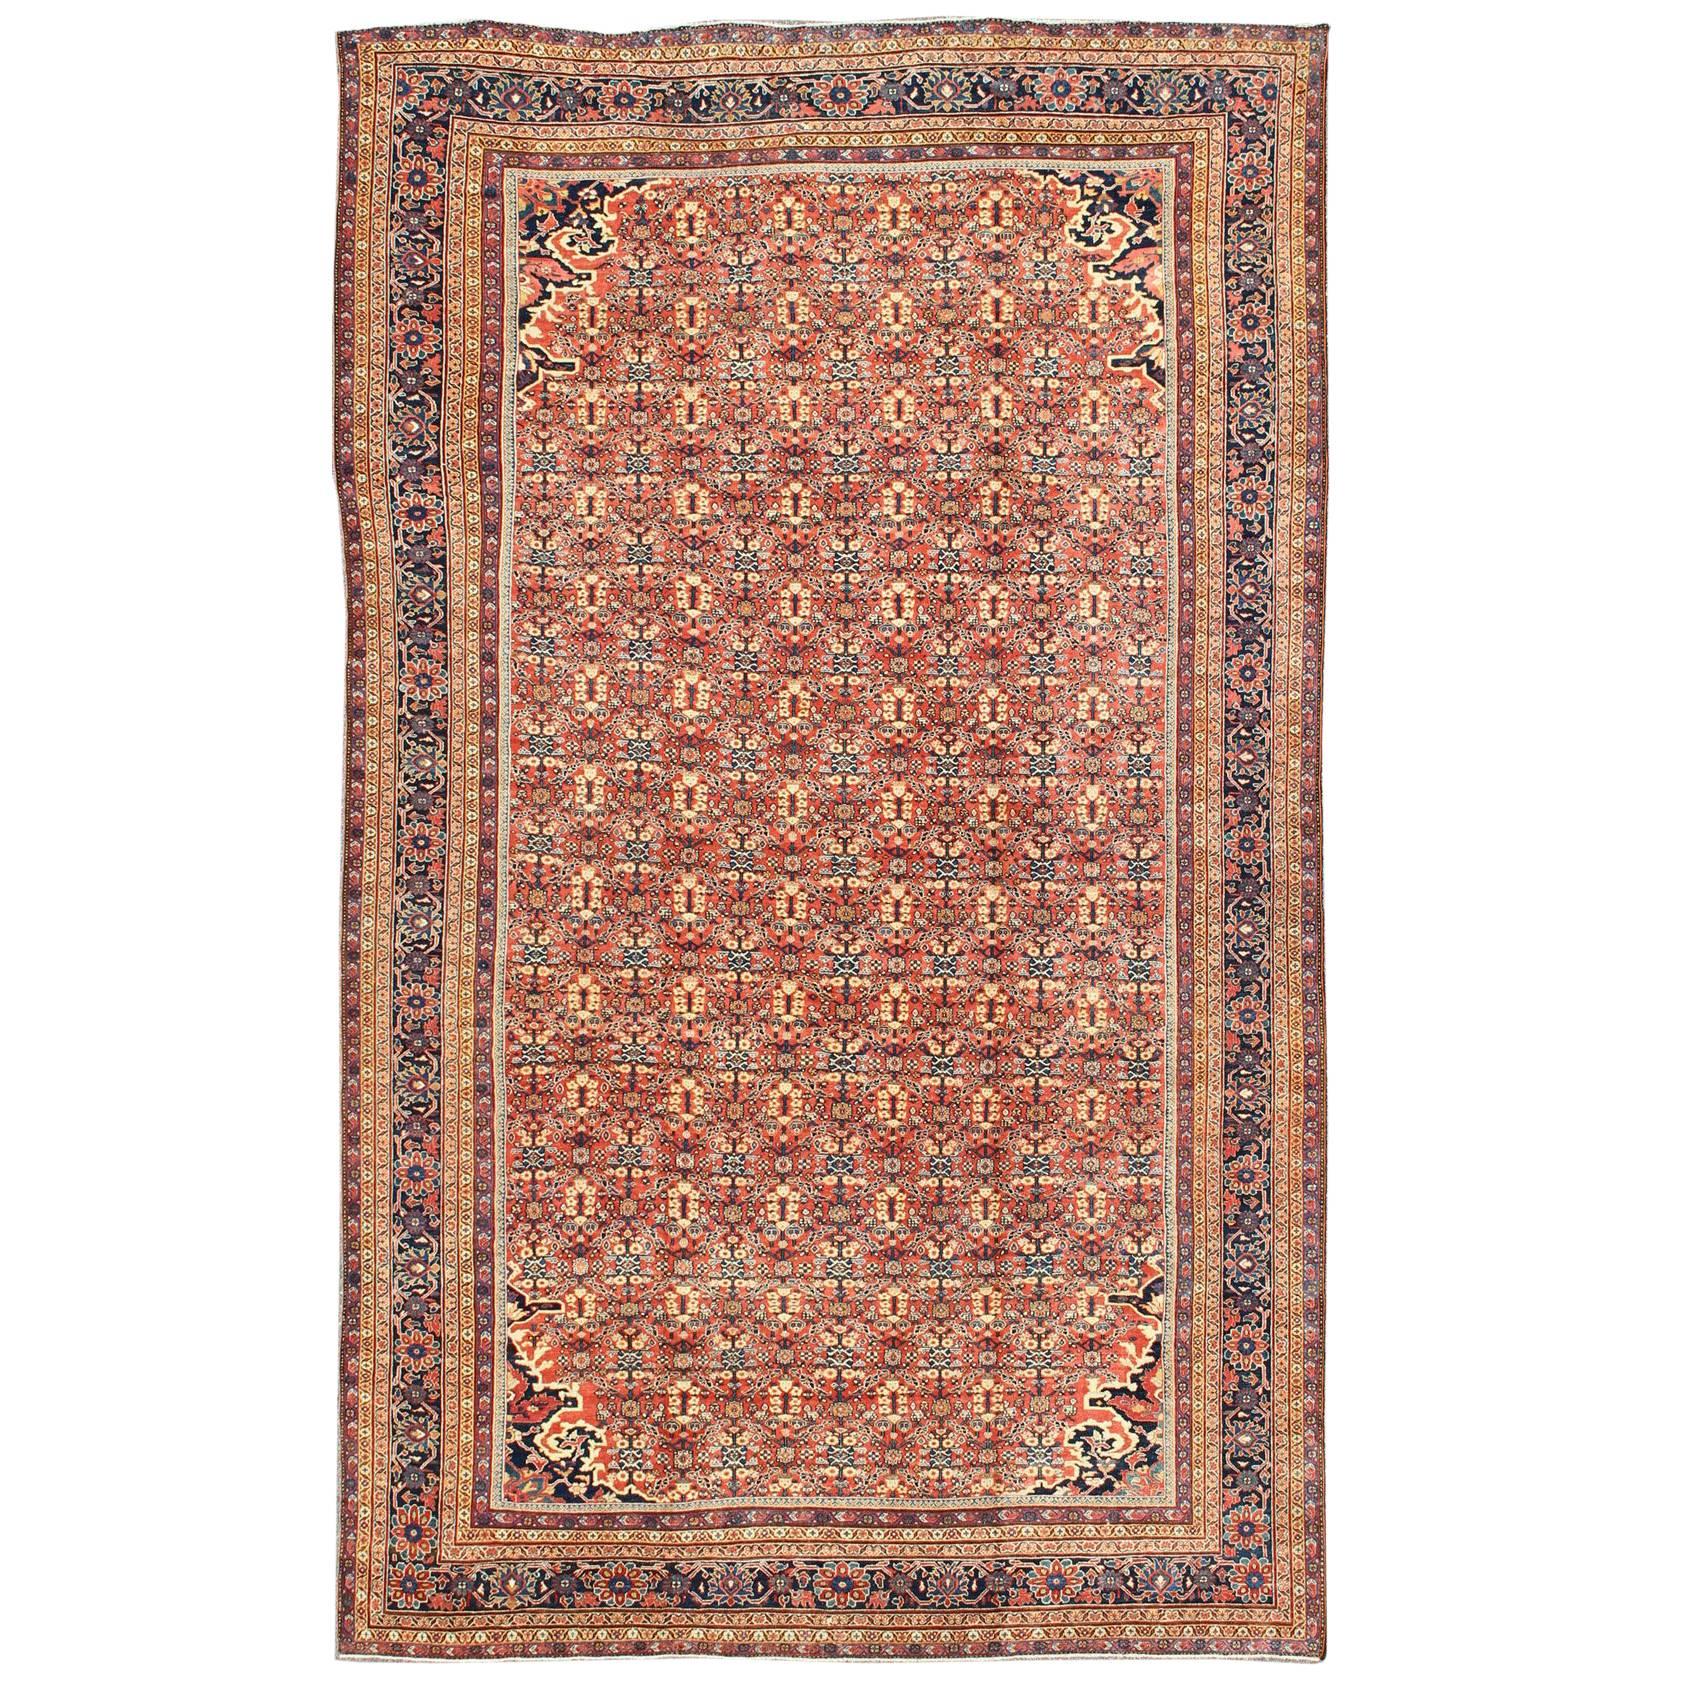 Antique Persian Sultanabad Rug with All Over Design in Rust Red, Blue and Cream